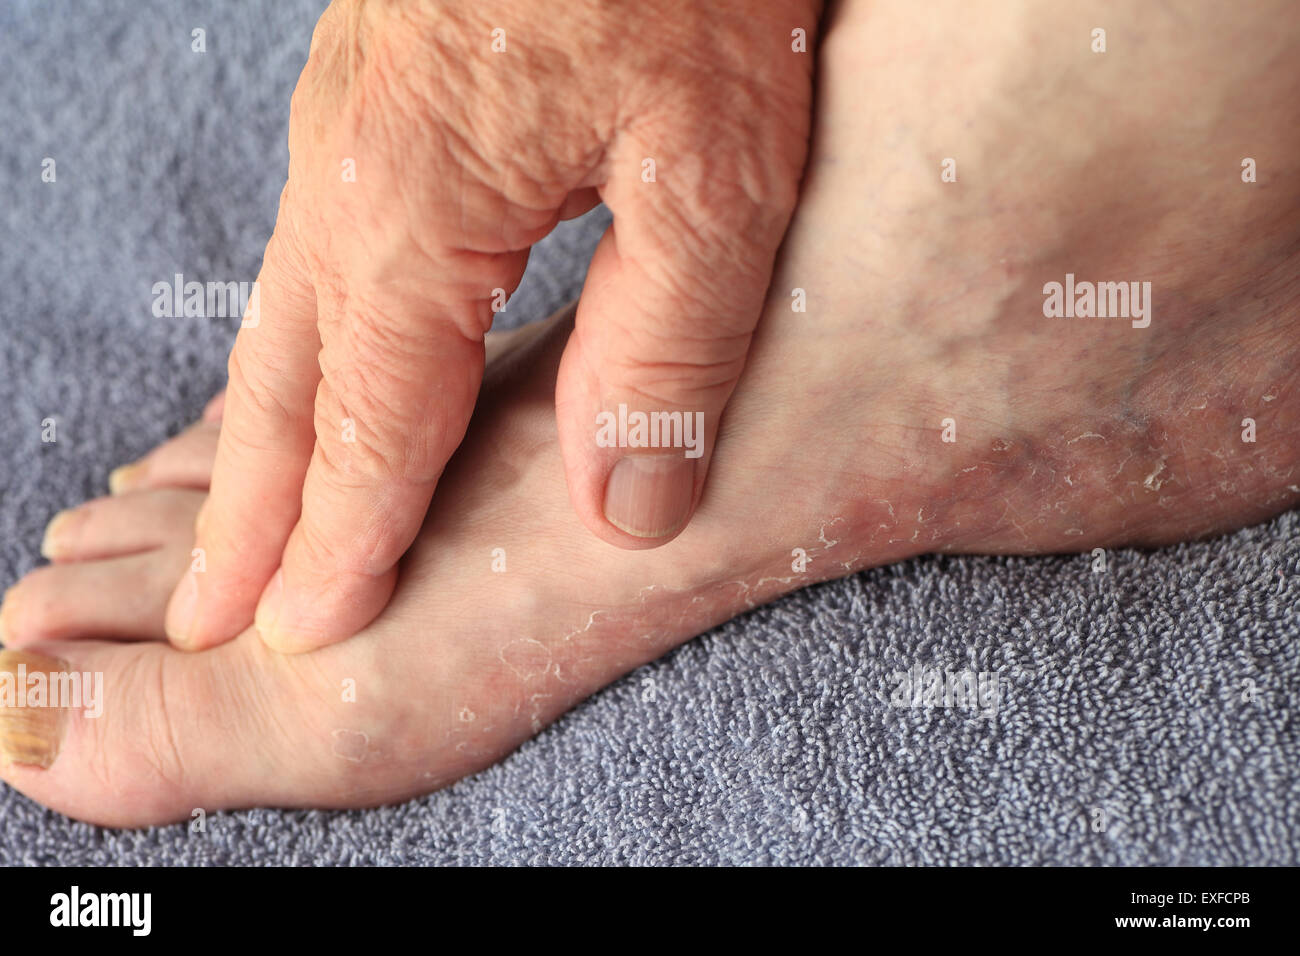 A man's foot with the dry, irritated skin of athlete's foot Stock Photo